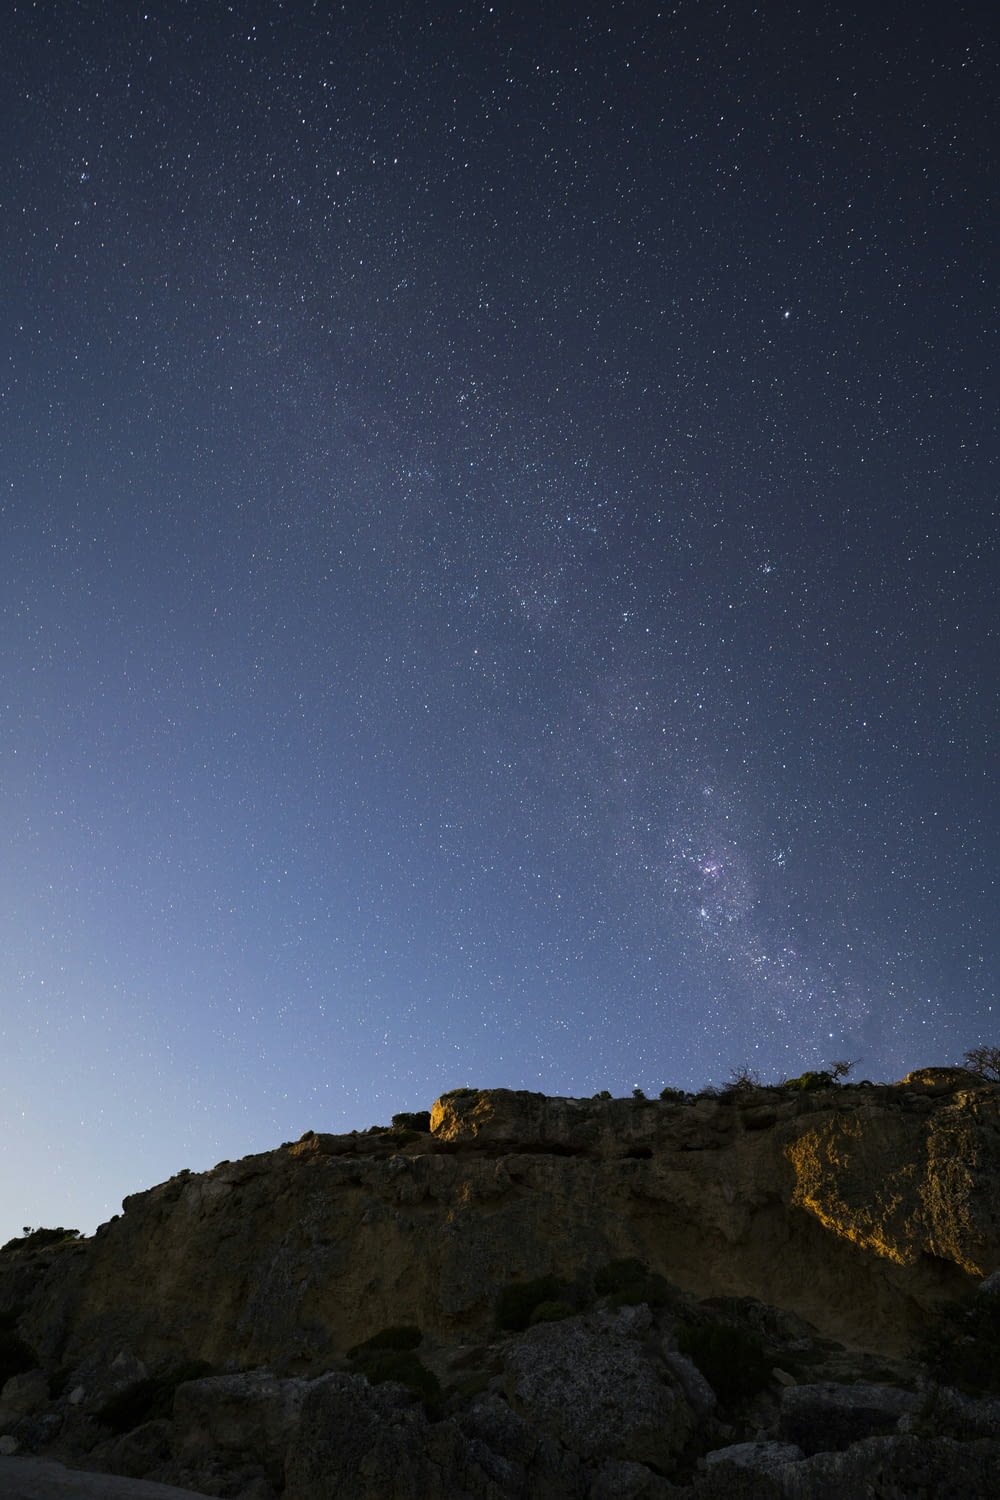 the night sky with stars above a rocky hill